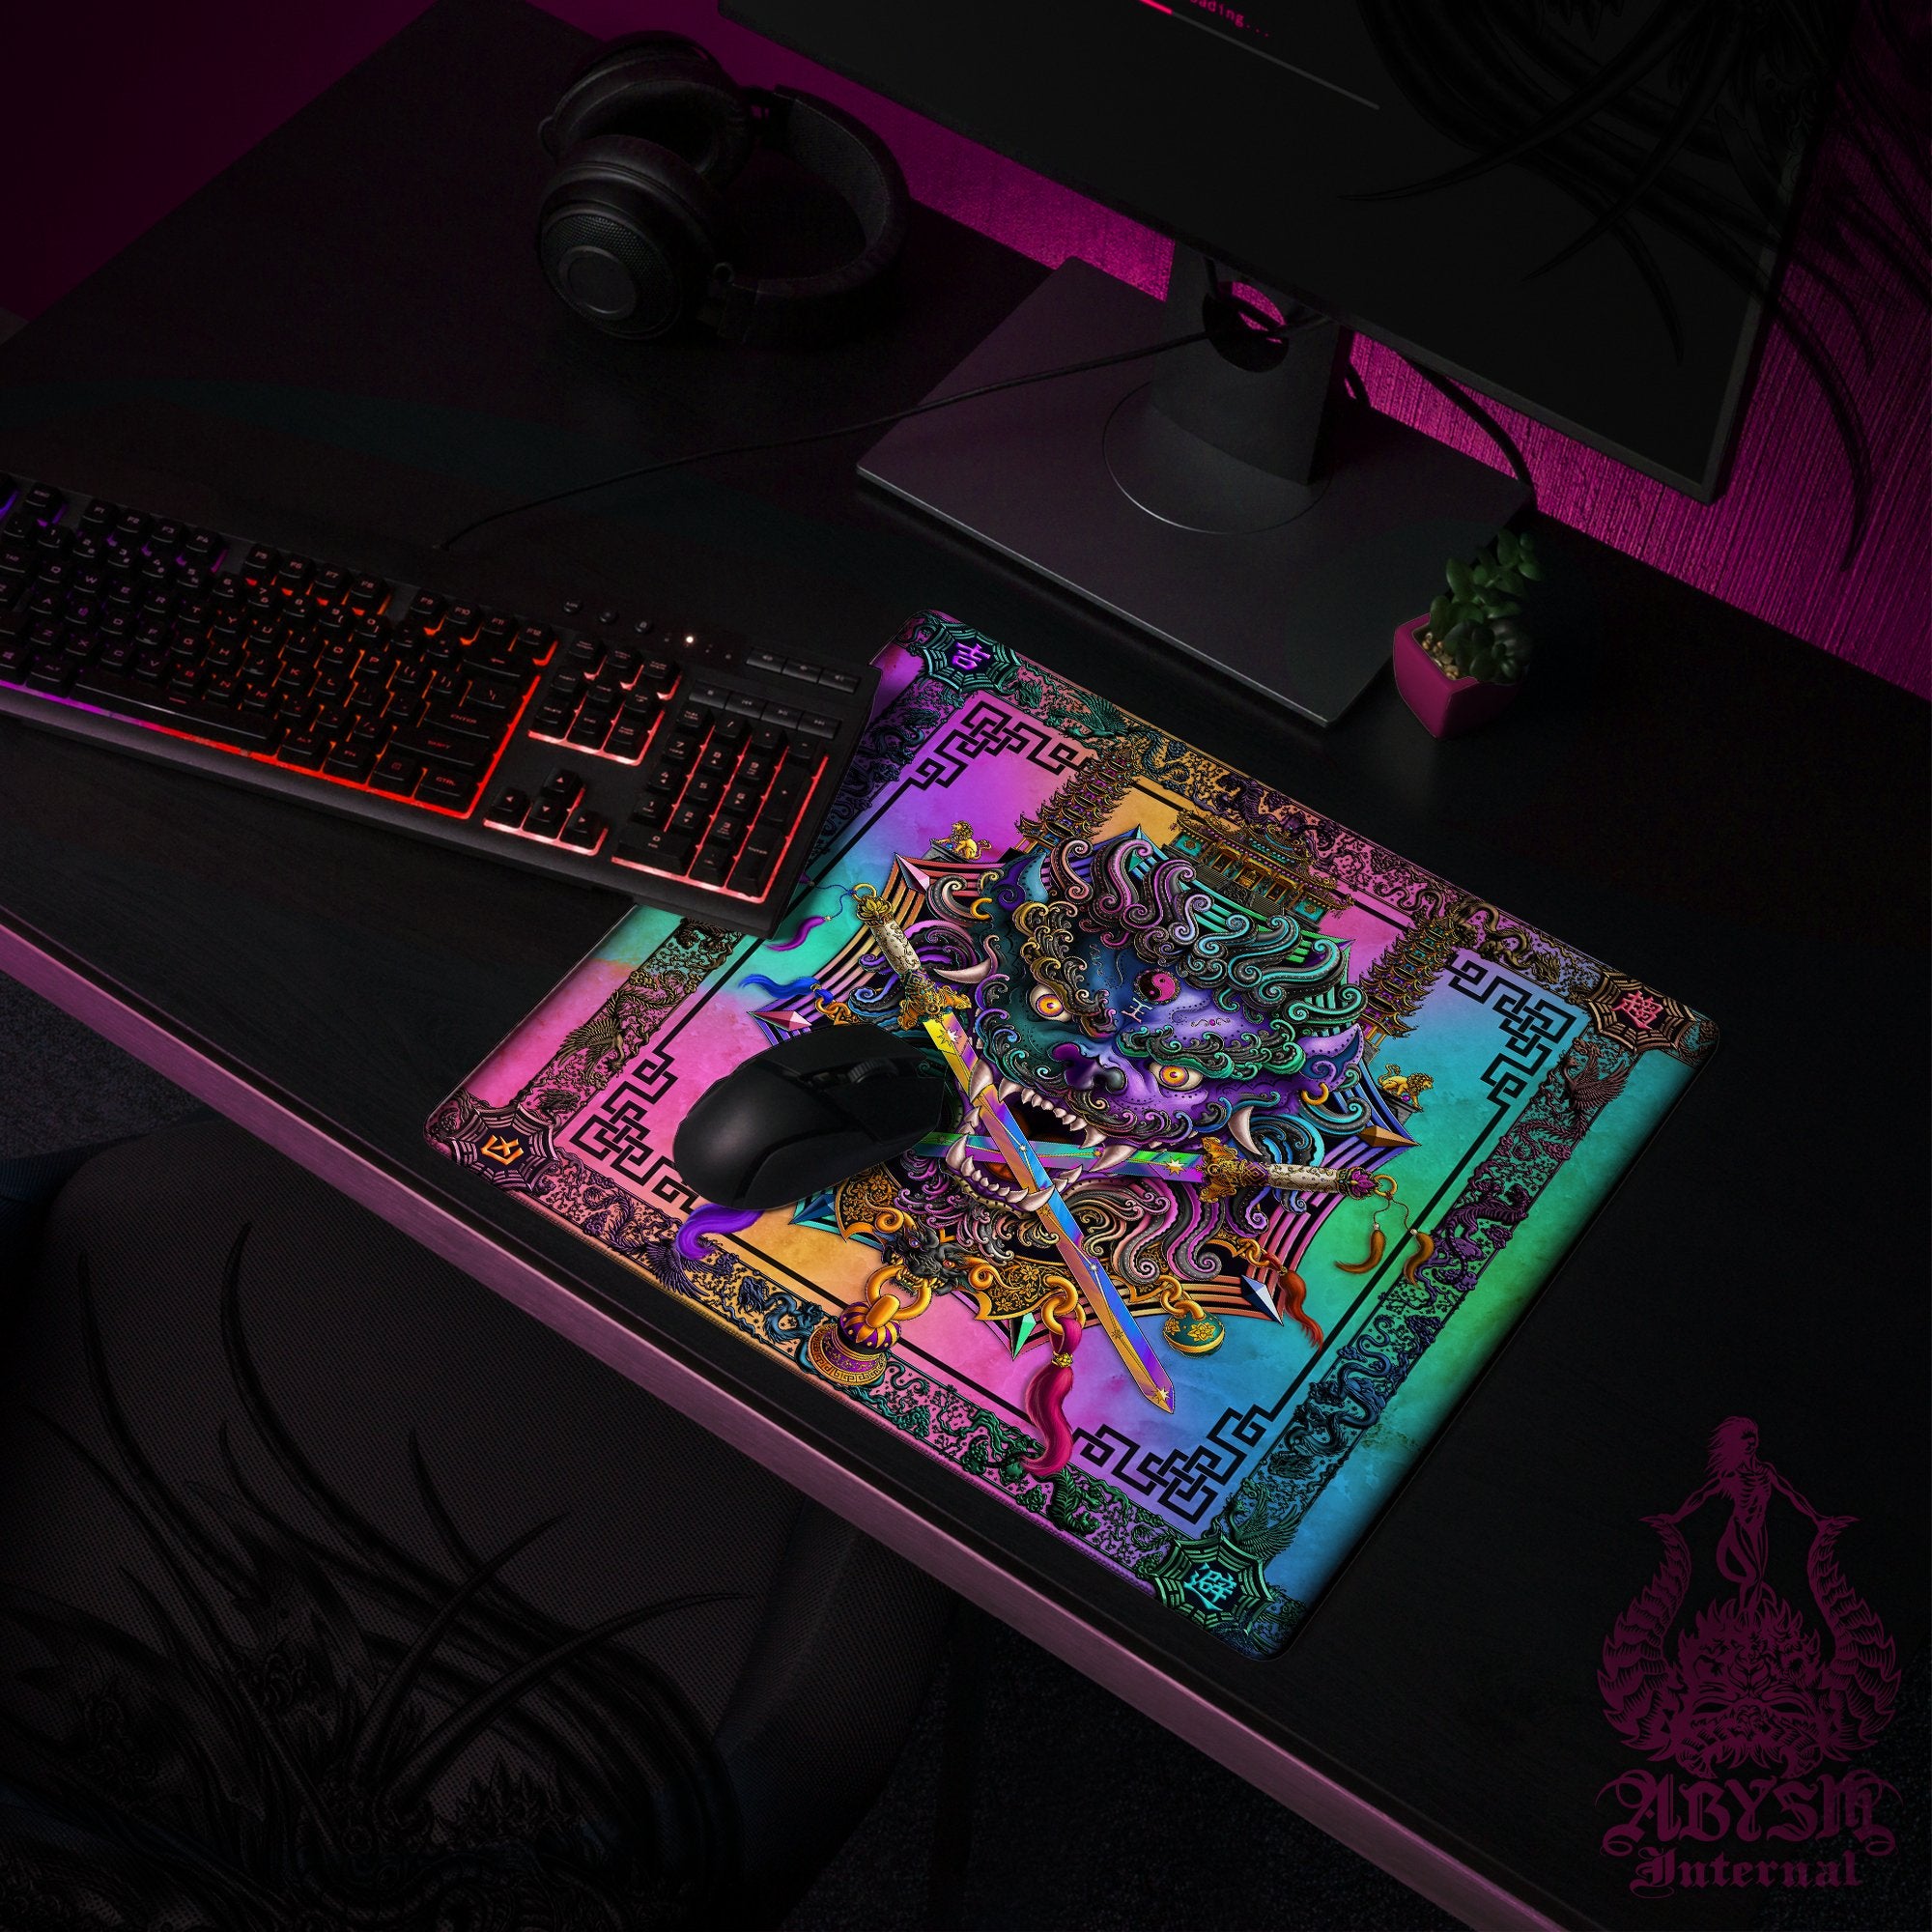 Taiwan Lion Gaming Desk Mat, Pastel Black Mouse Pad, Chinese Table Protector Cover, Asian Workpad, Fantasy Art Print - Abysm Internal